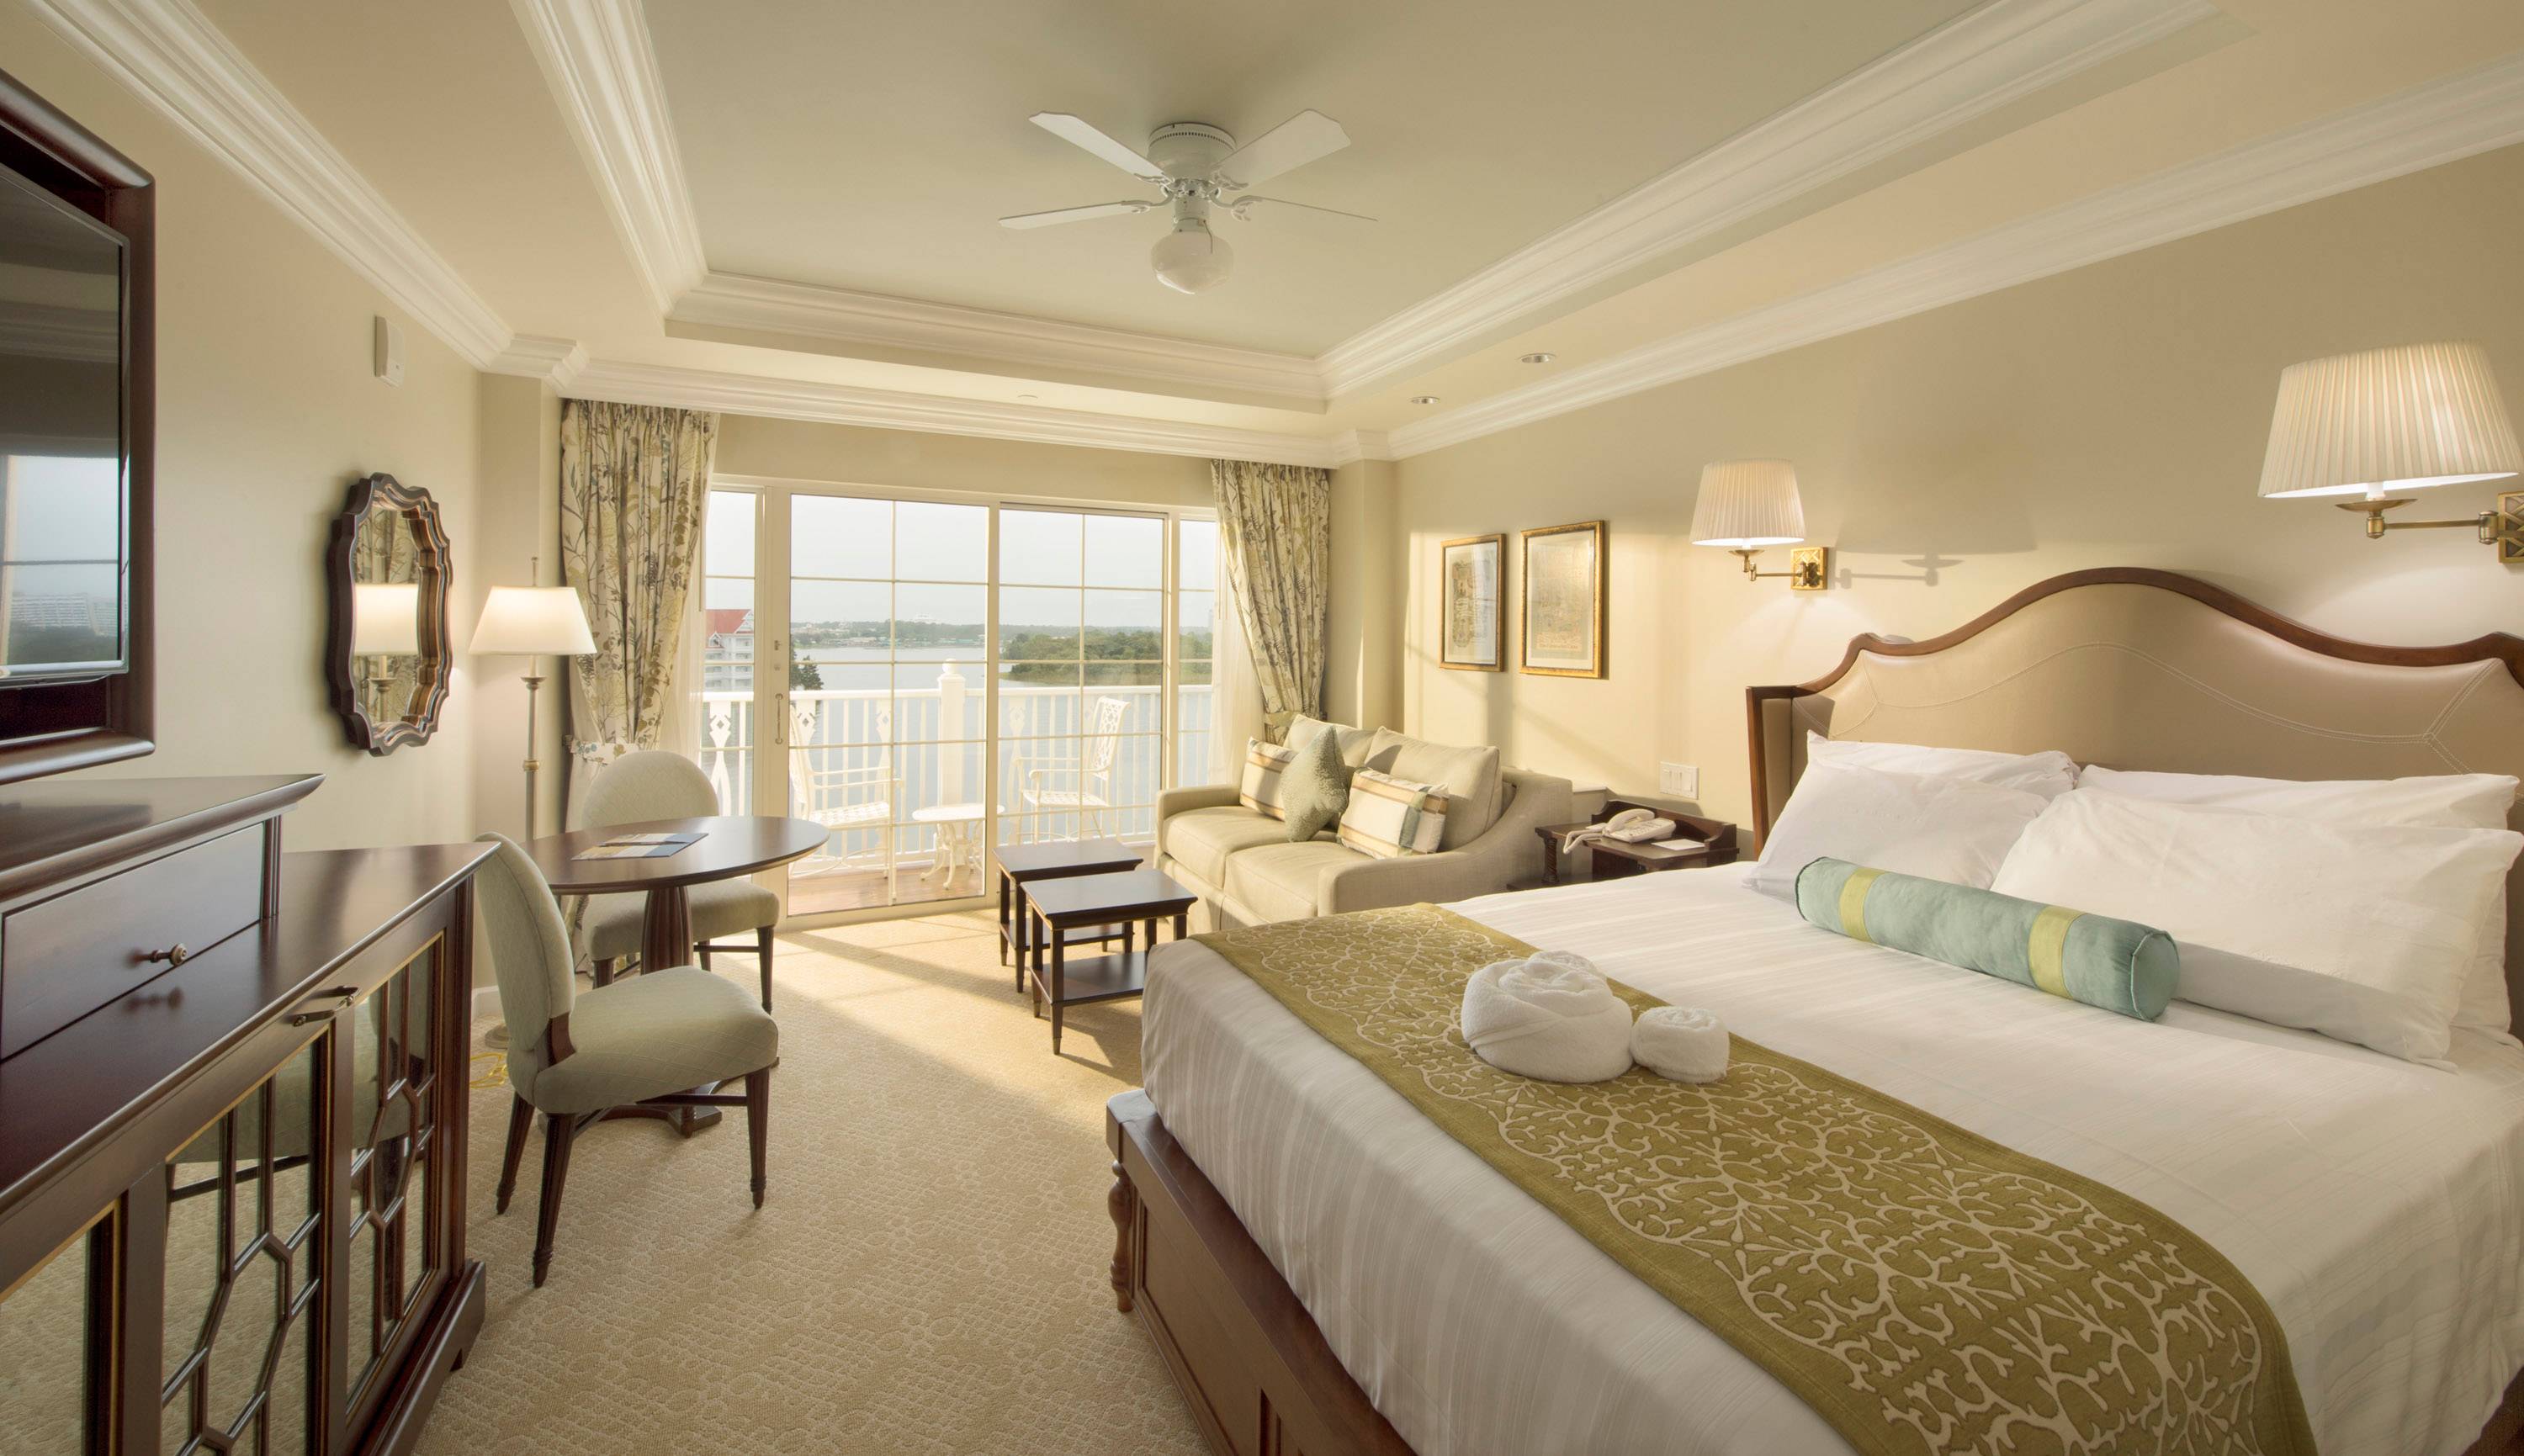 Disney show us inside The Villas at Disney's Grand Floridian Resort and announce sales to begin this week